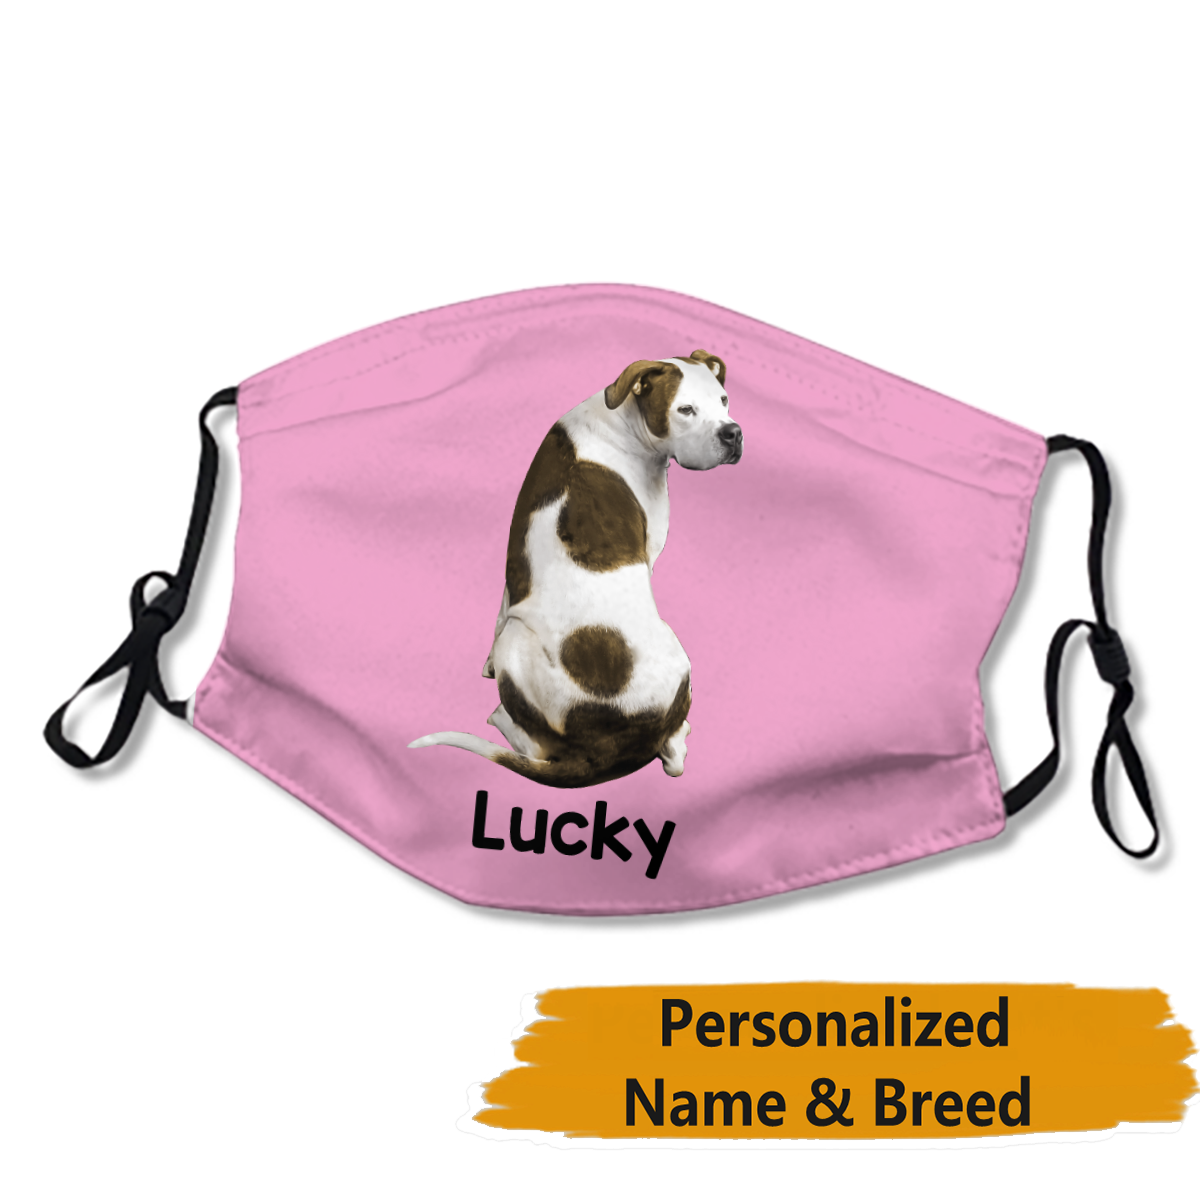 Personalized Dog's Name & Breed Face Mask No.2